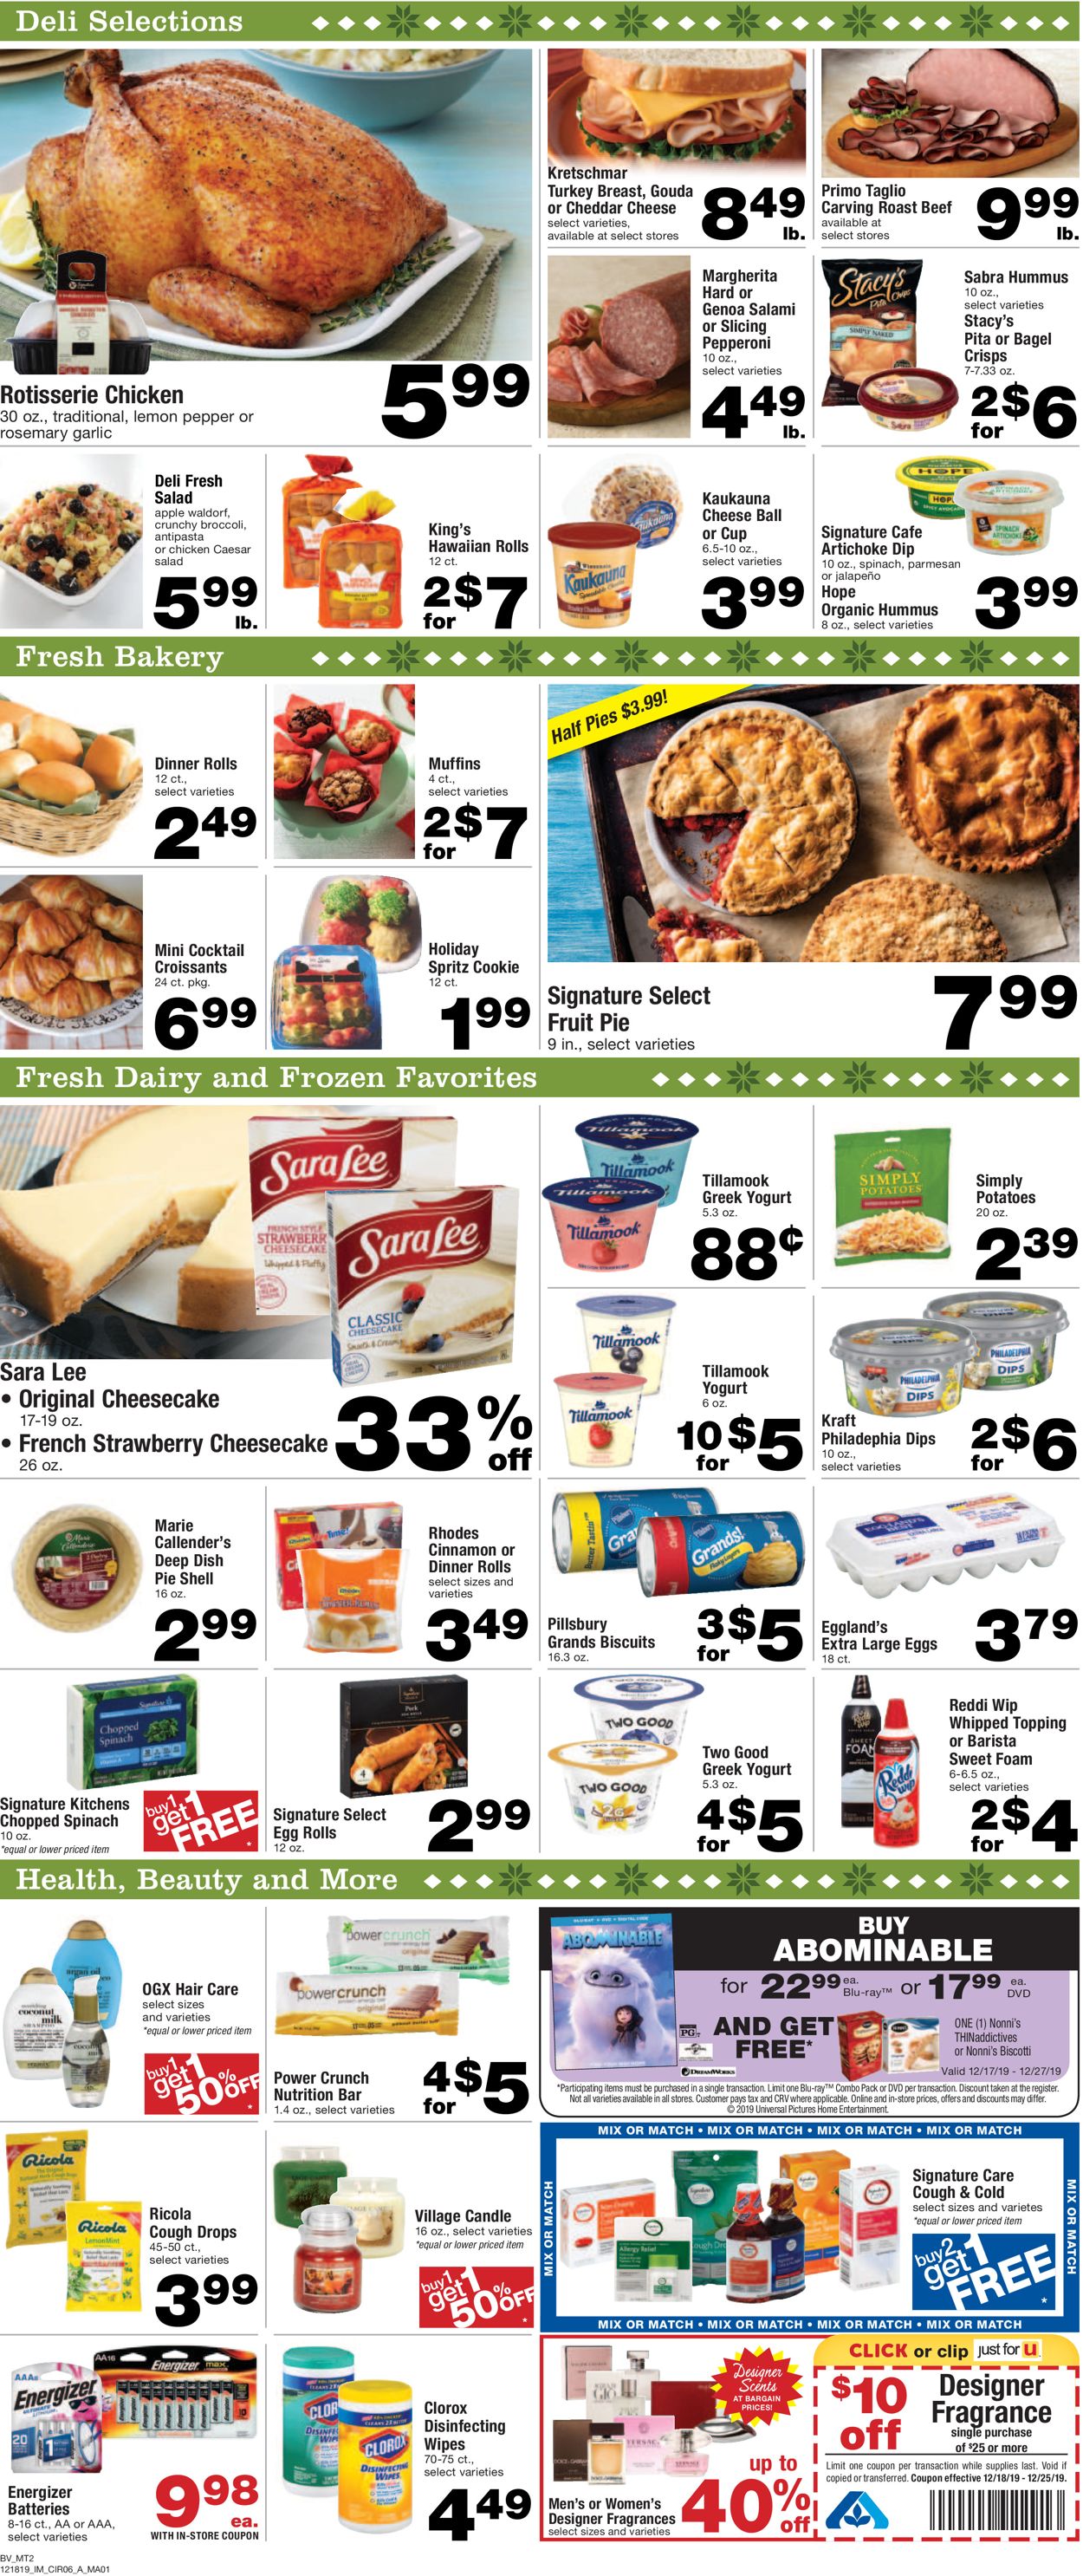 Albertsons - Christmas Ad 2019 Current weekly ad 12/18 - 12/25/2019 [6 ...